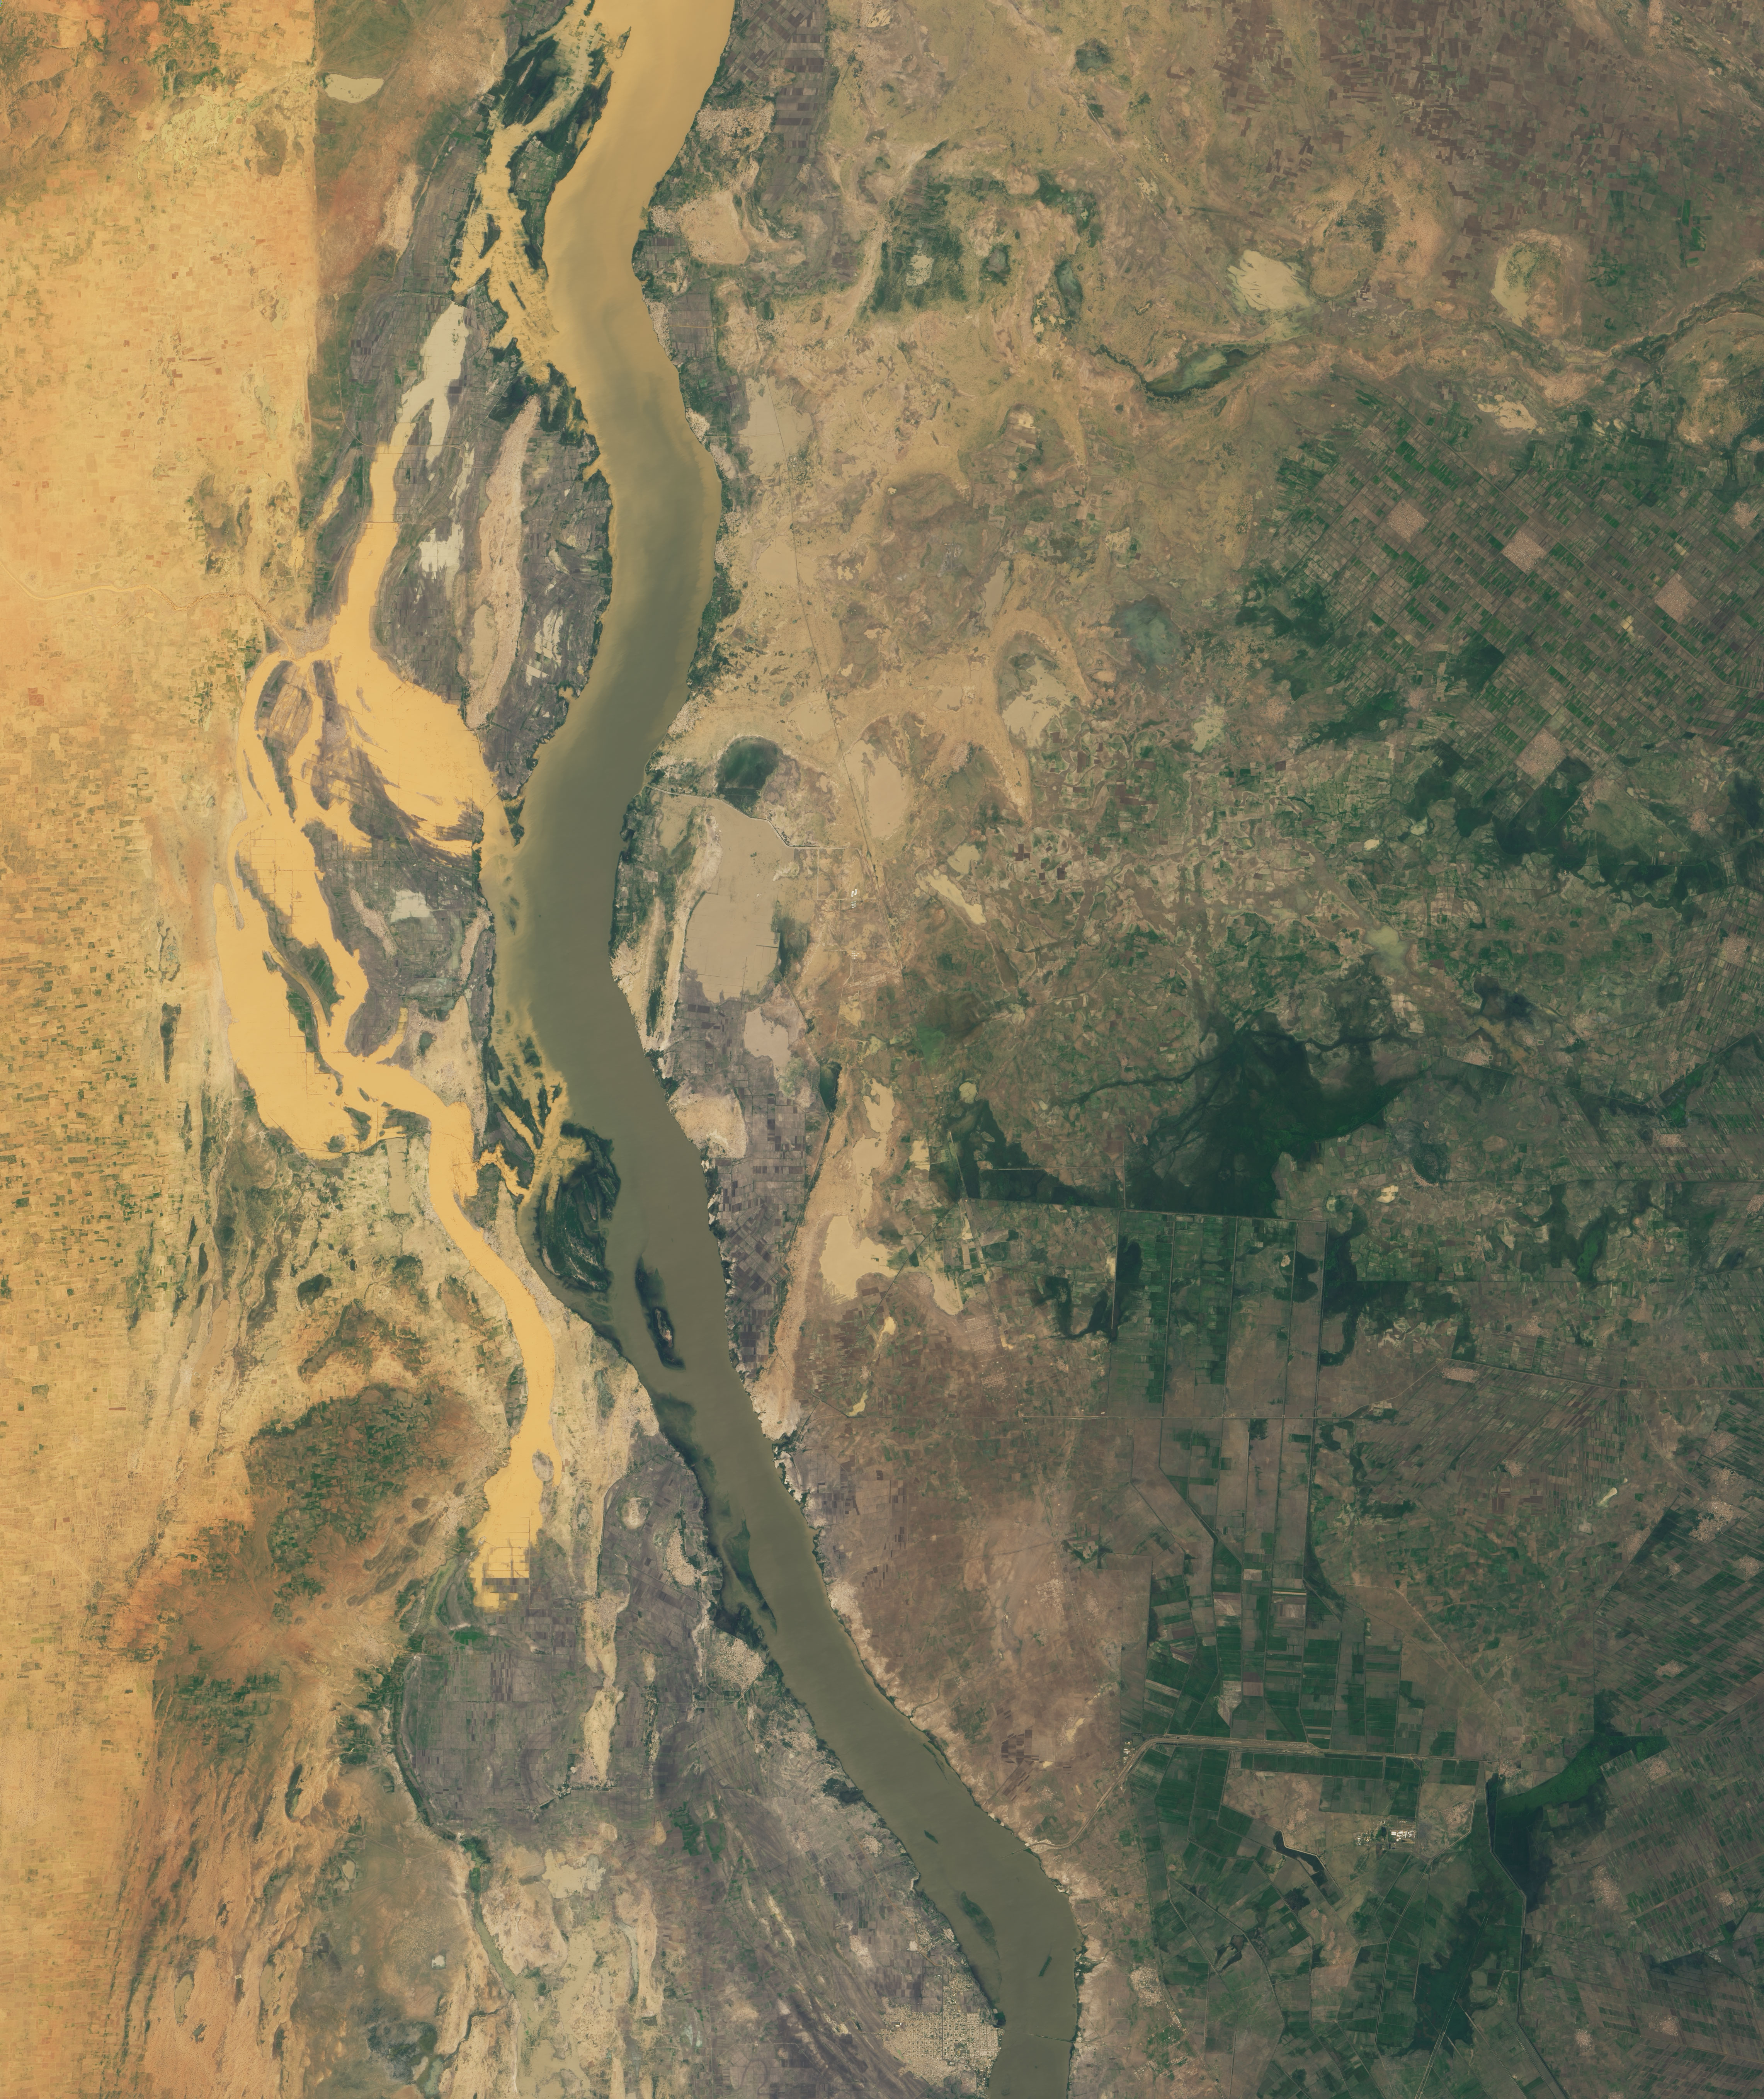 Floods Swamp Sudan - related image preview